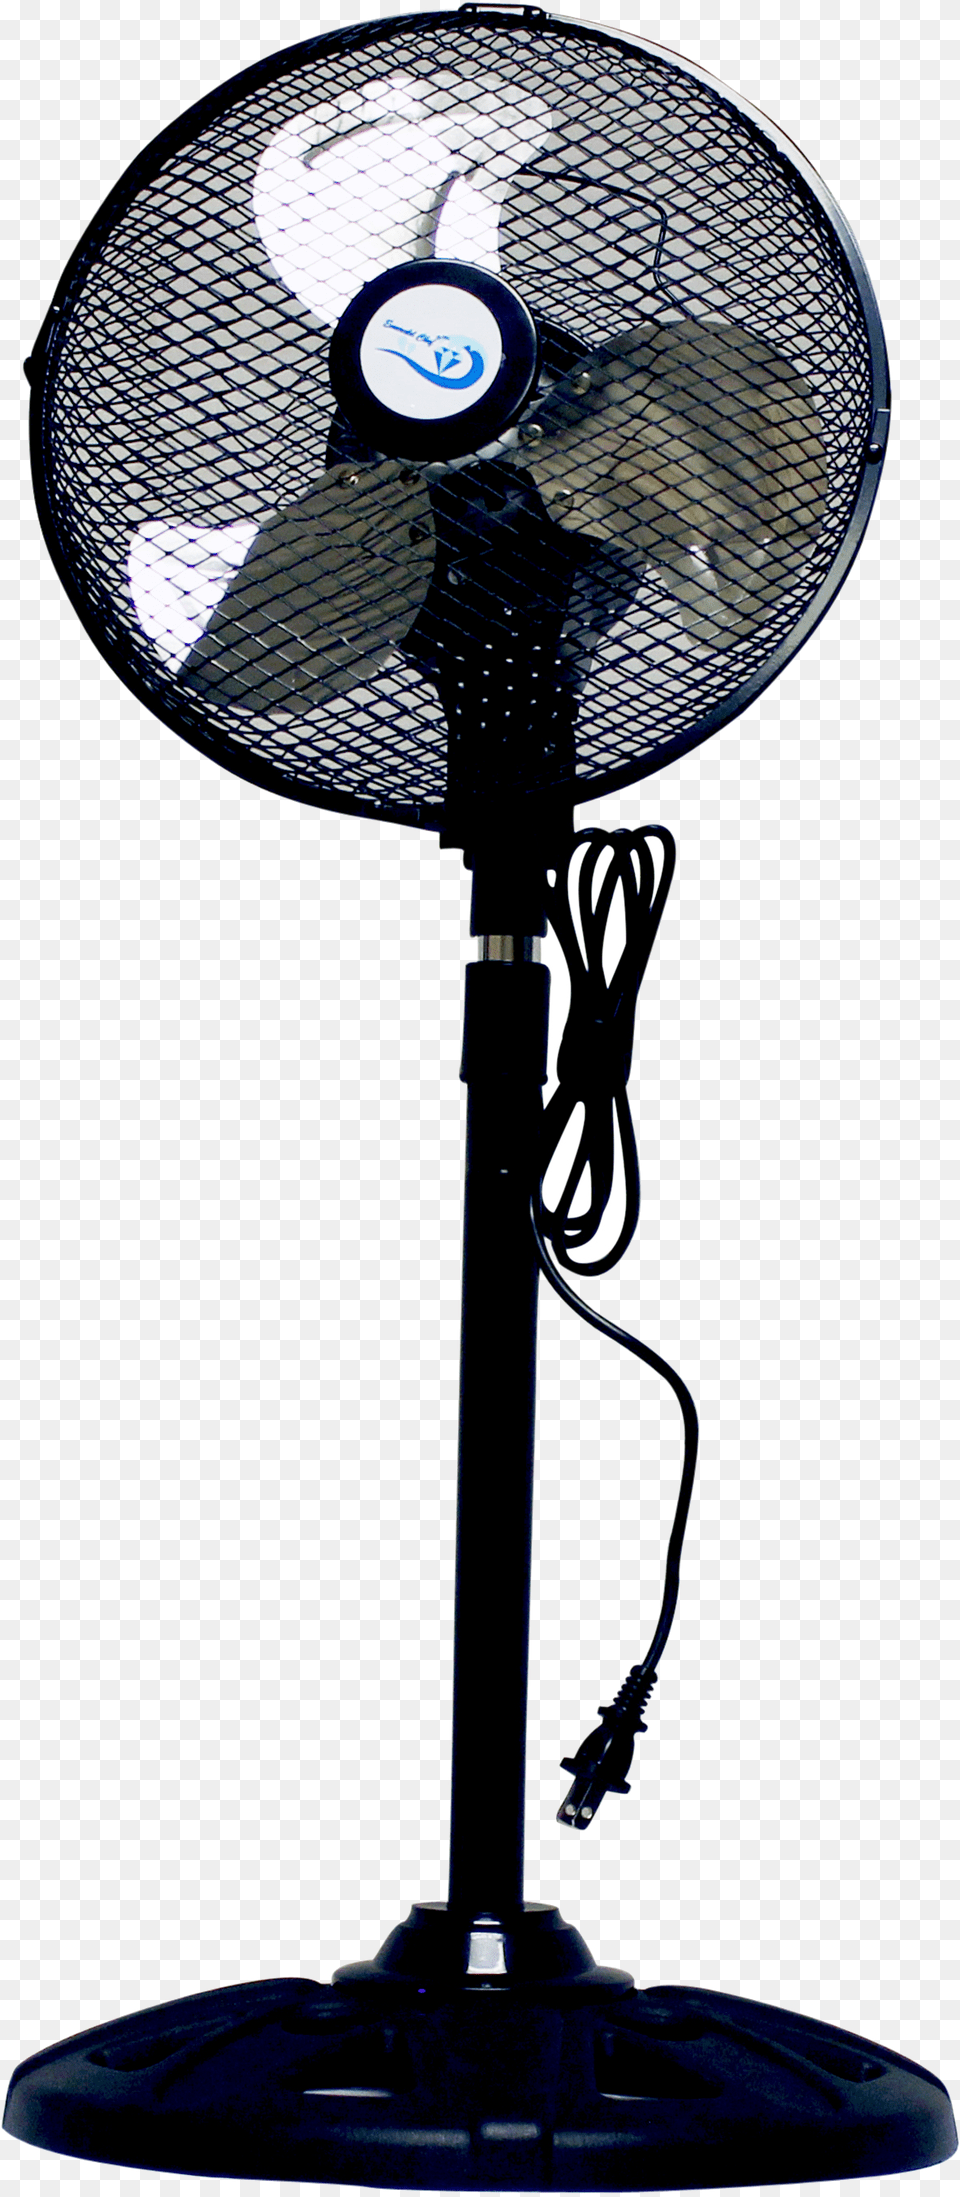 Net Winged Insects, Device, Appliance, Electrical Device, Electric Fan Png Image